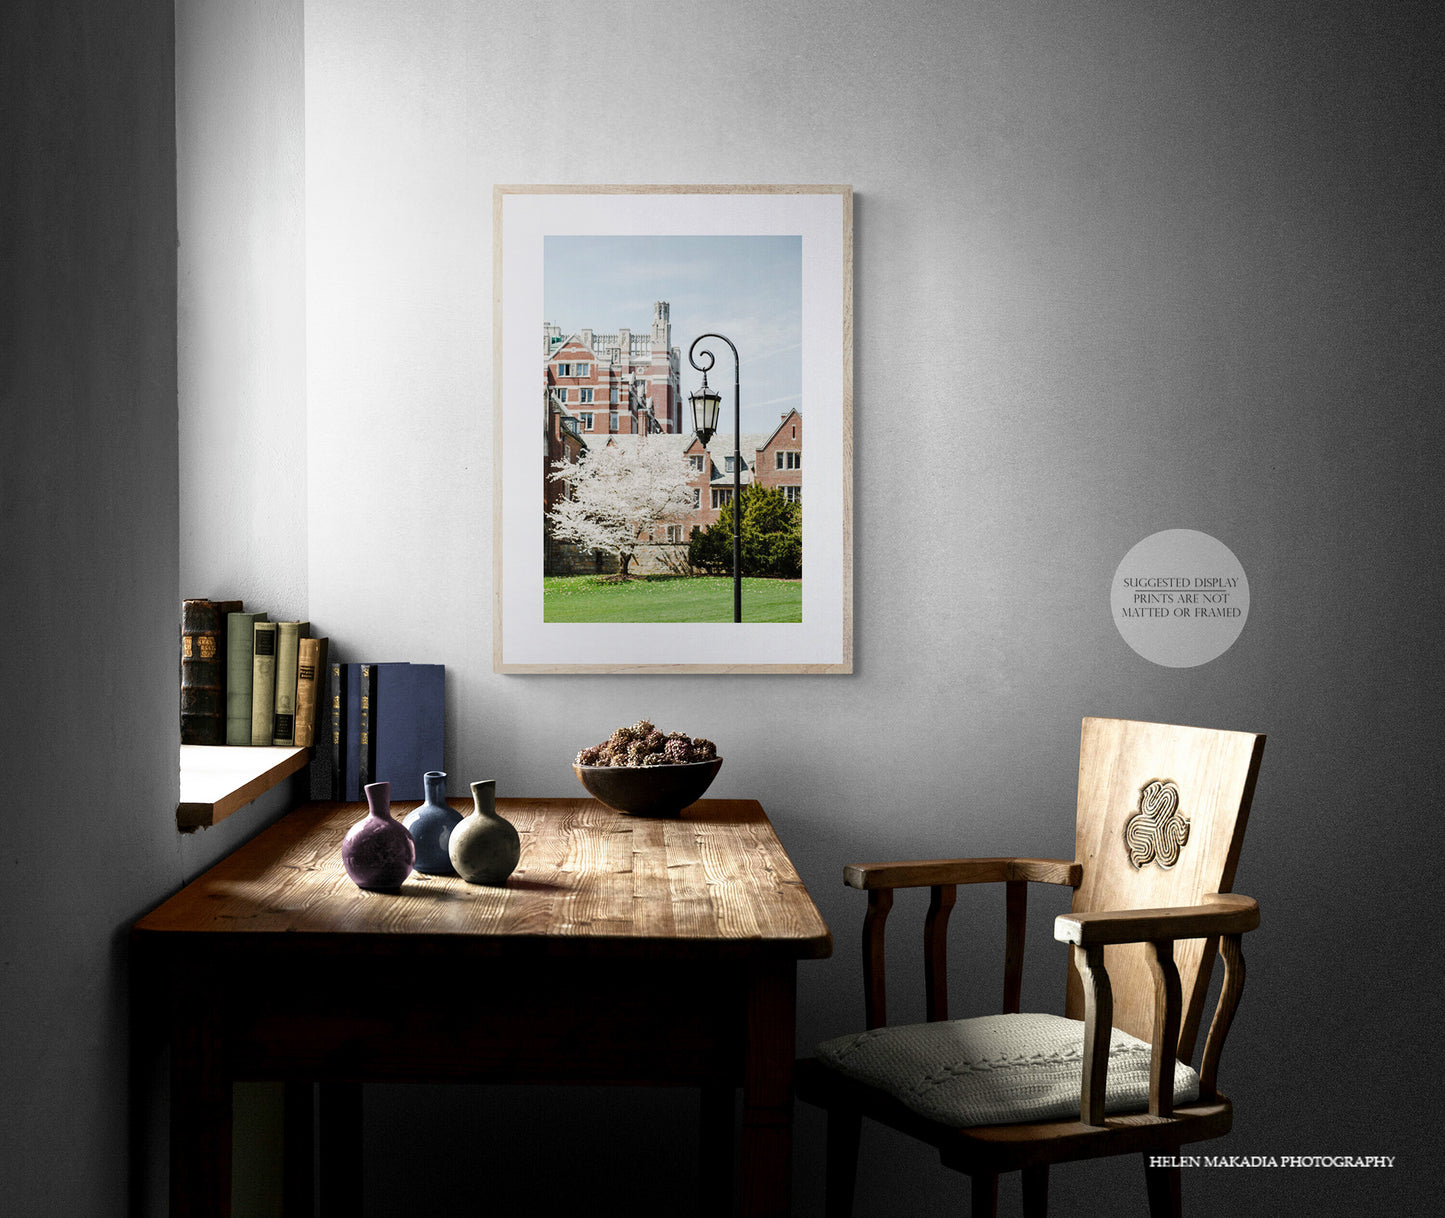 Severance Green with Tower Court and Severance Hall in the background at Wellesley College, Photograph as Wall Art in an Office